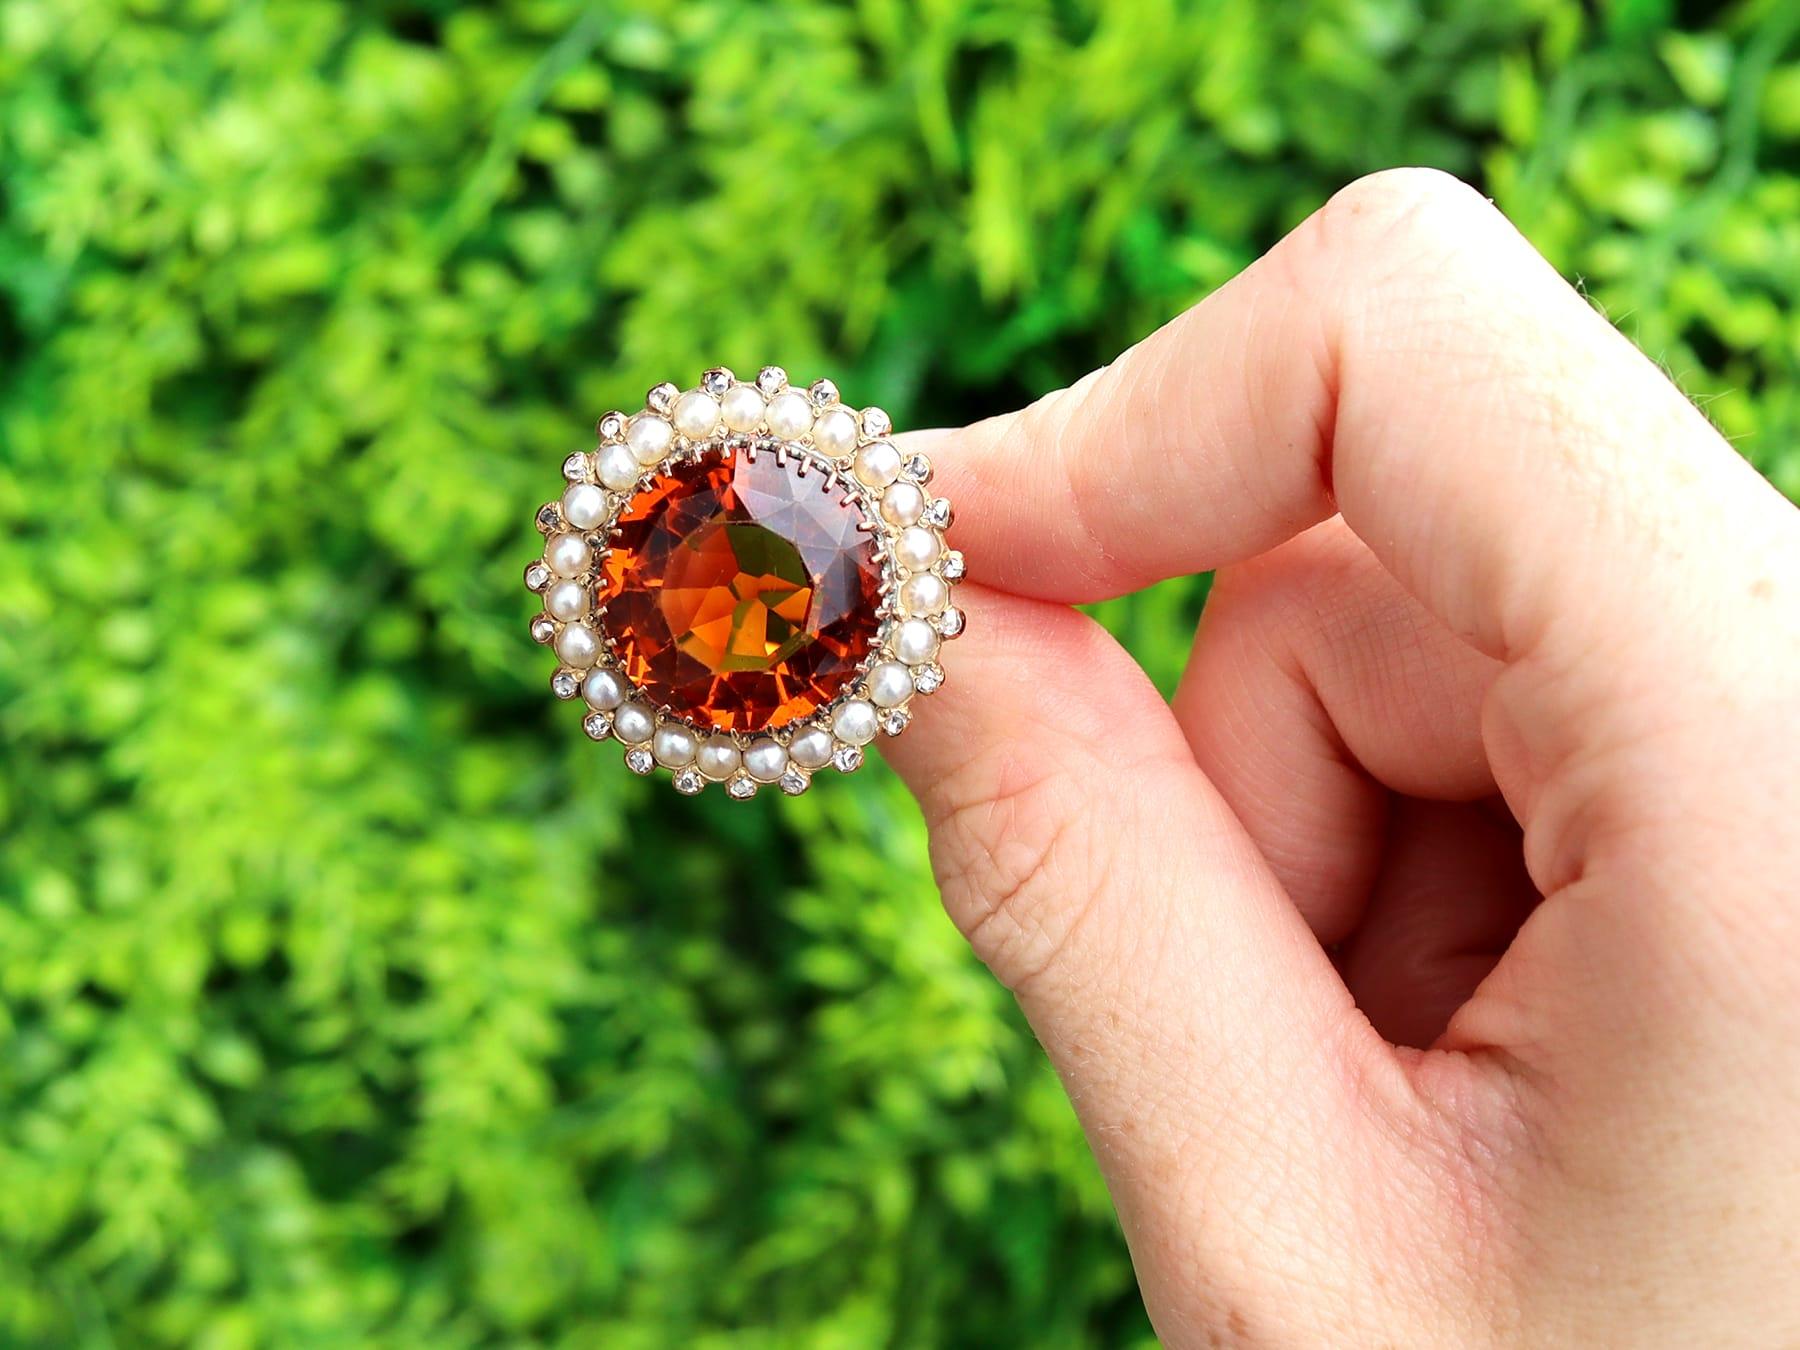 A stunning vintage Dutch 13.46 carat citrine and 0.29 carat diamond, seed pearl and 14 karat yellow gold cocktail ring; part of our diverse gemstone jewelry collections.

This stunning, fine and impressive vintage ring has been crafted in 14k yellow